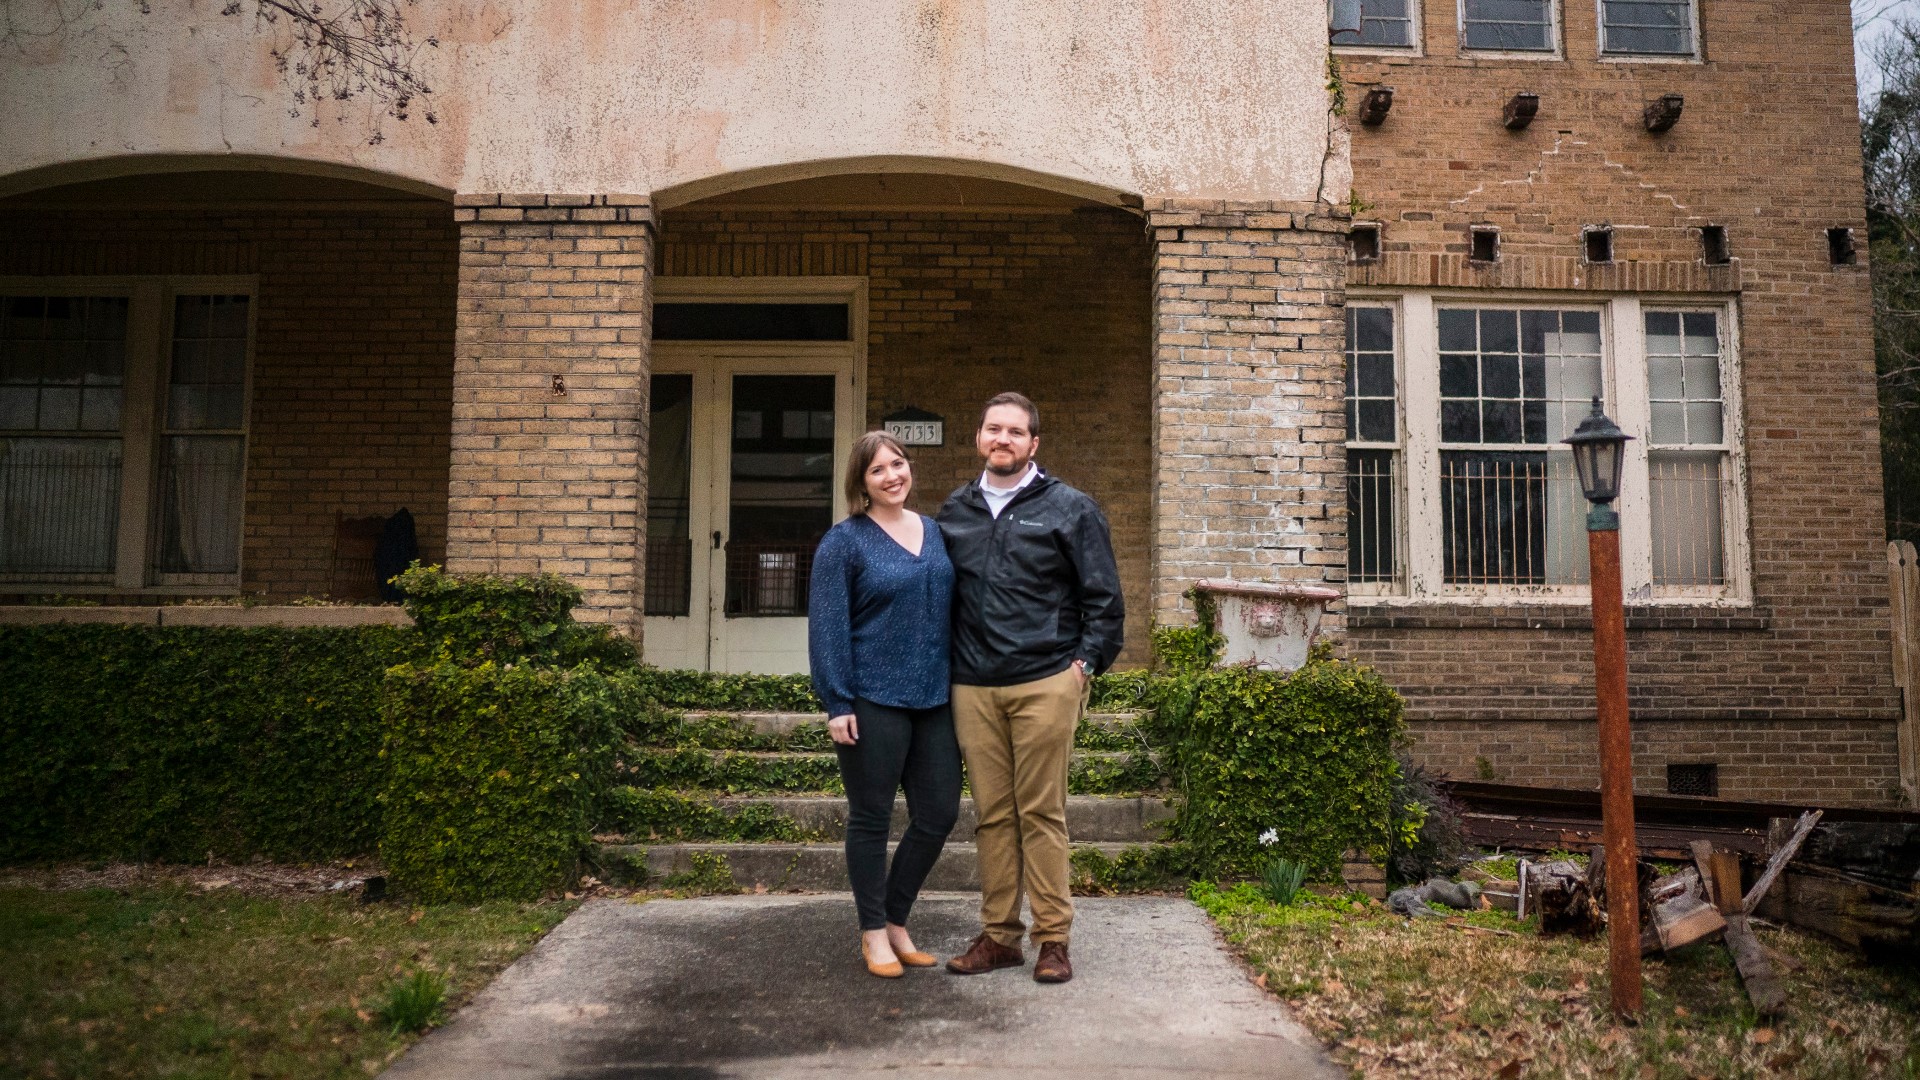 Rachelle Wilson and Trent Mosely are working to preserve the Guy E. Paine house. It's more than 100 years old and was once listed on Historic Macon's Fading Five.